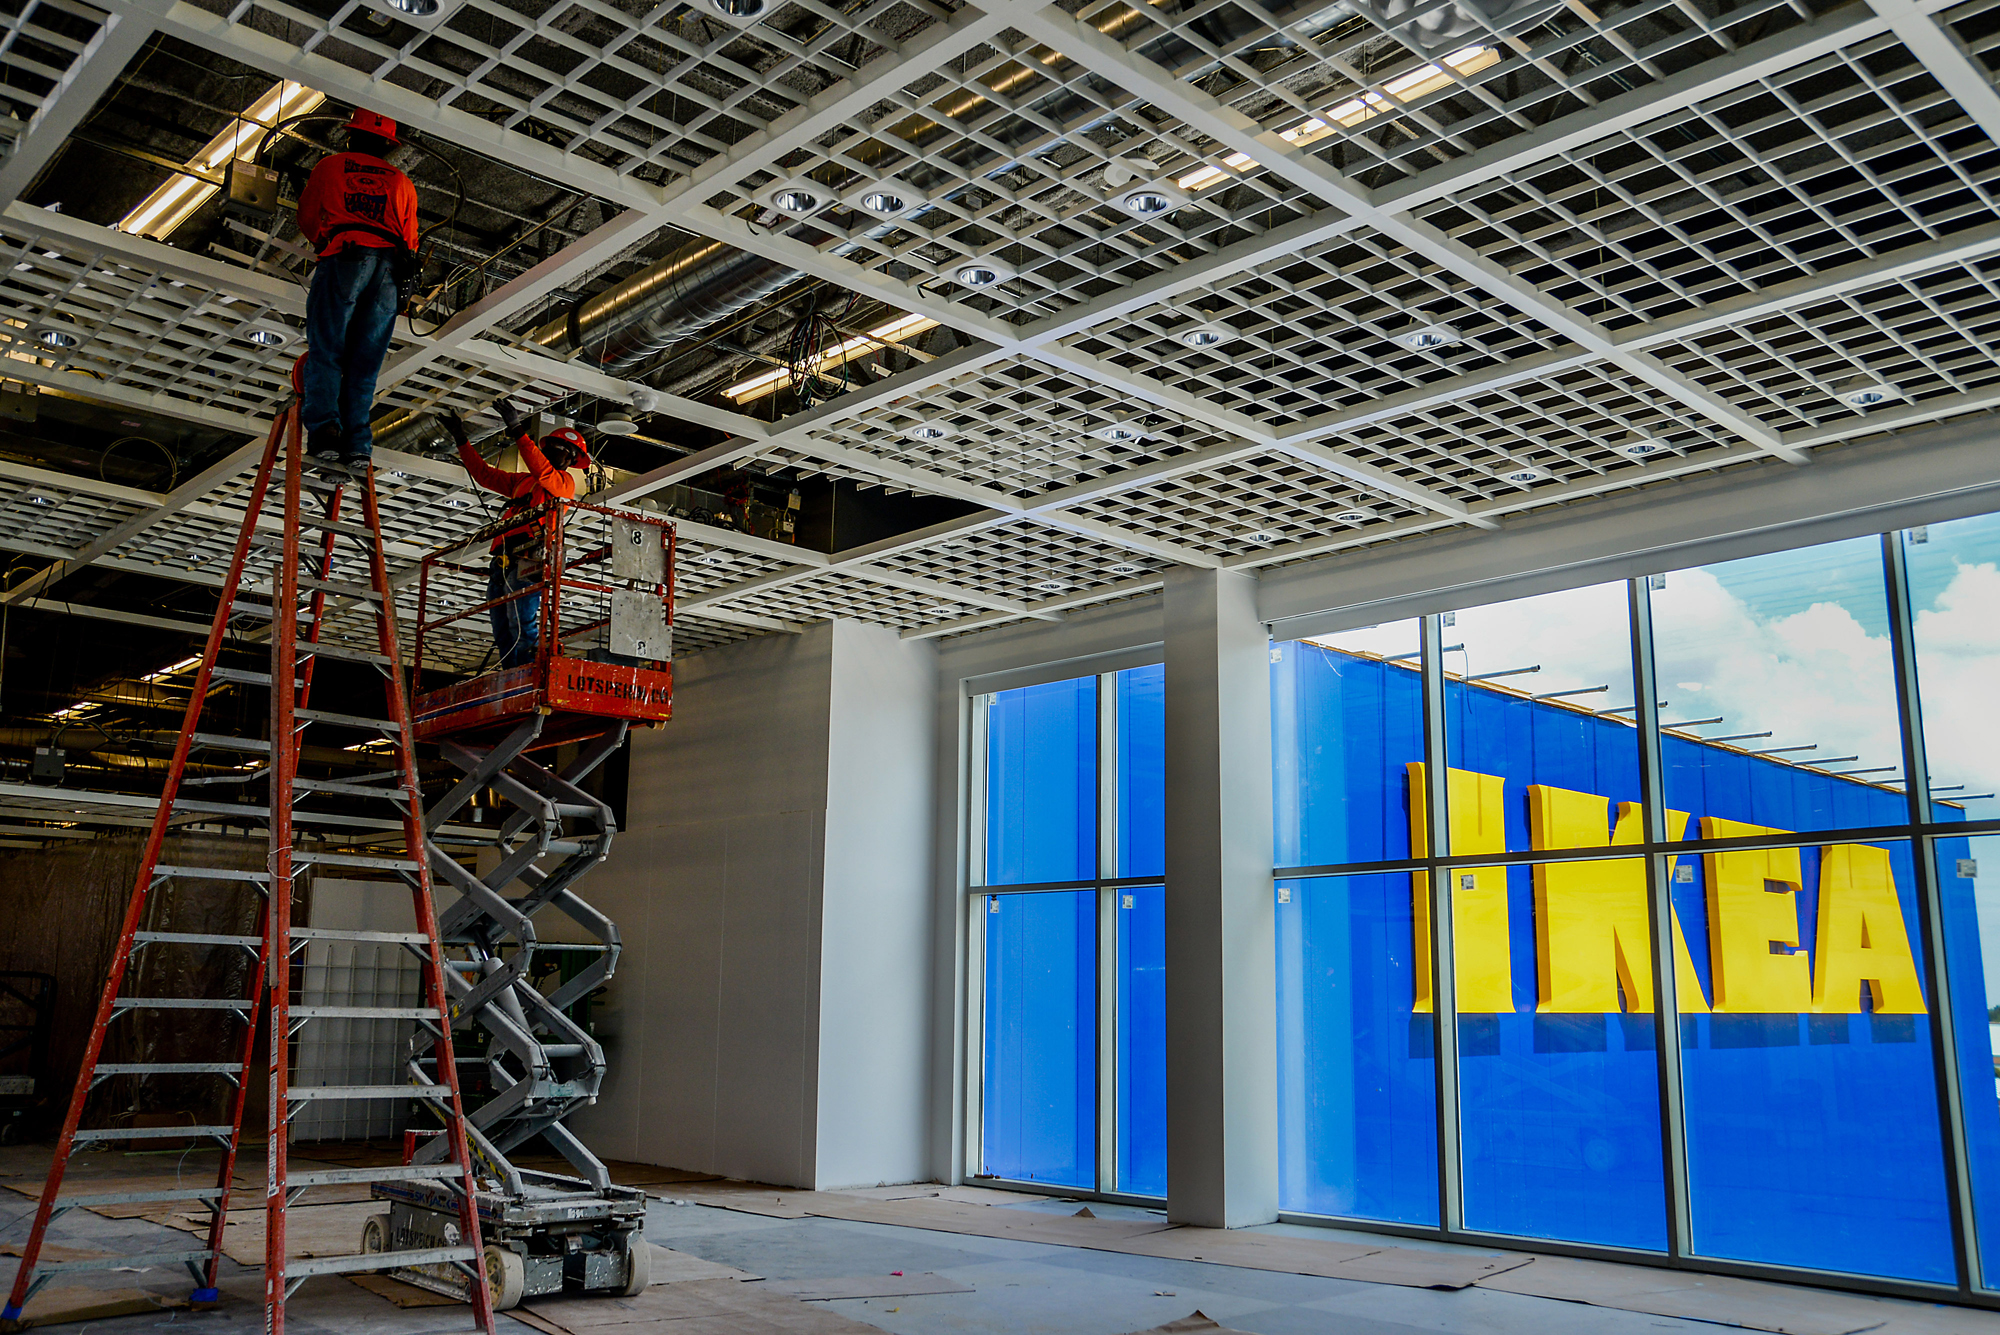 Contractors work on construction of a new IKEA store in Miami, May 20, 2014.